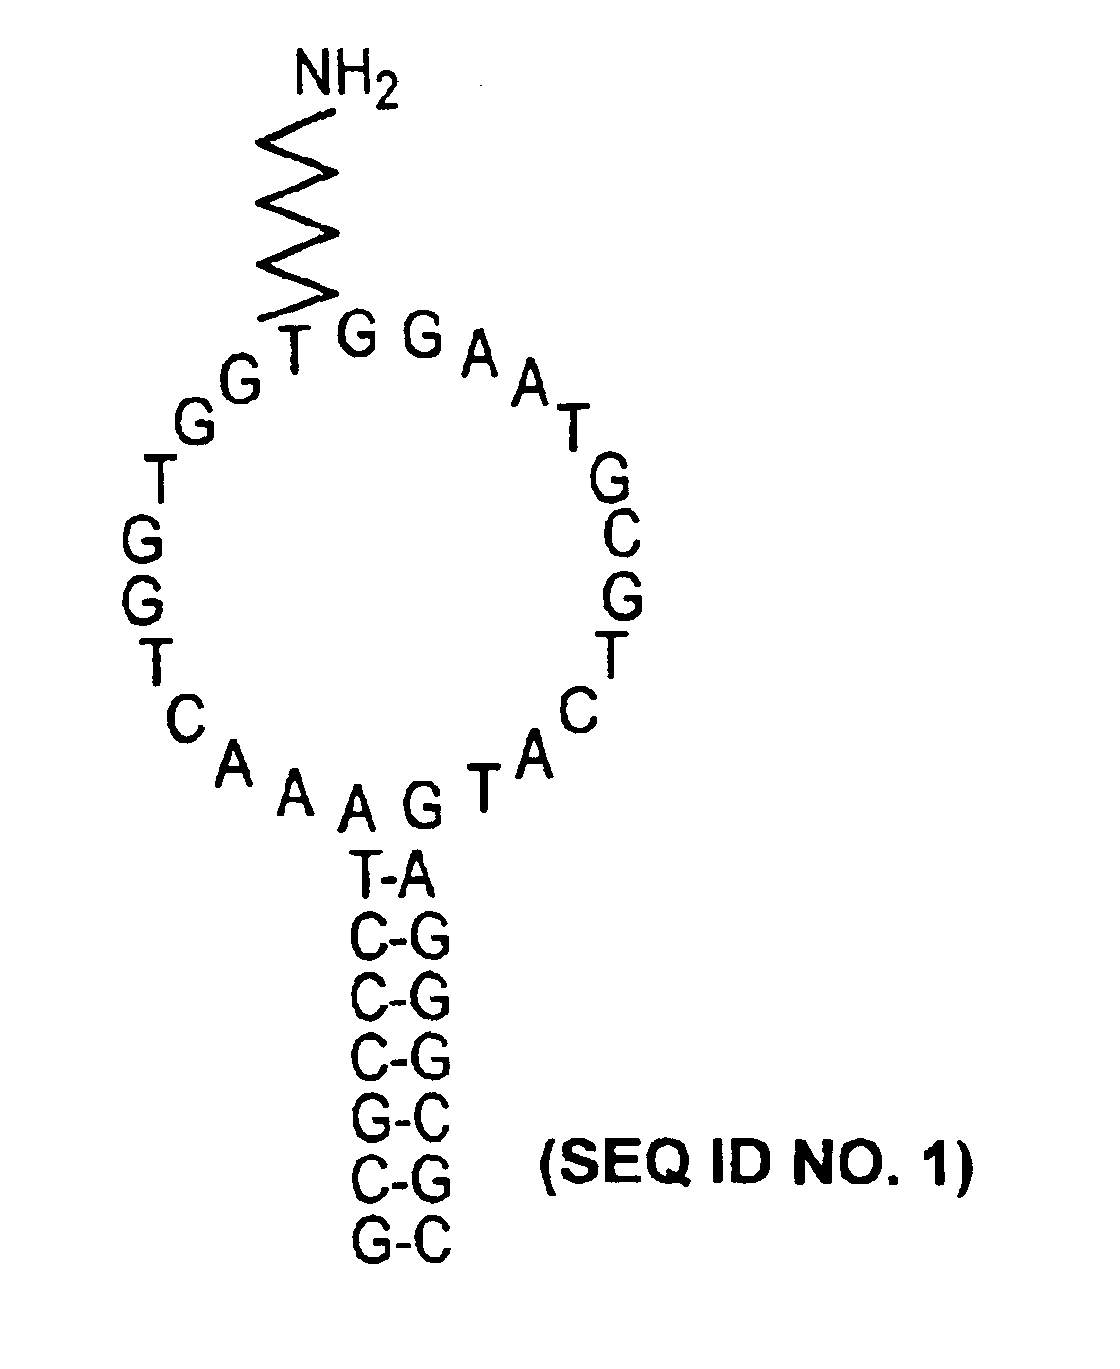 Direct, externally imposed control of nucleic acids